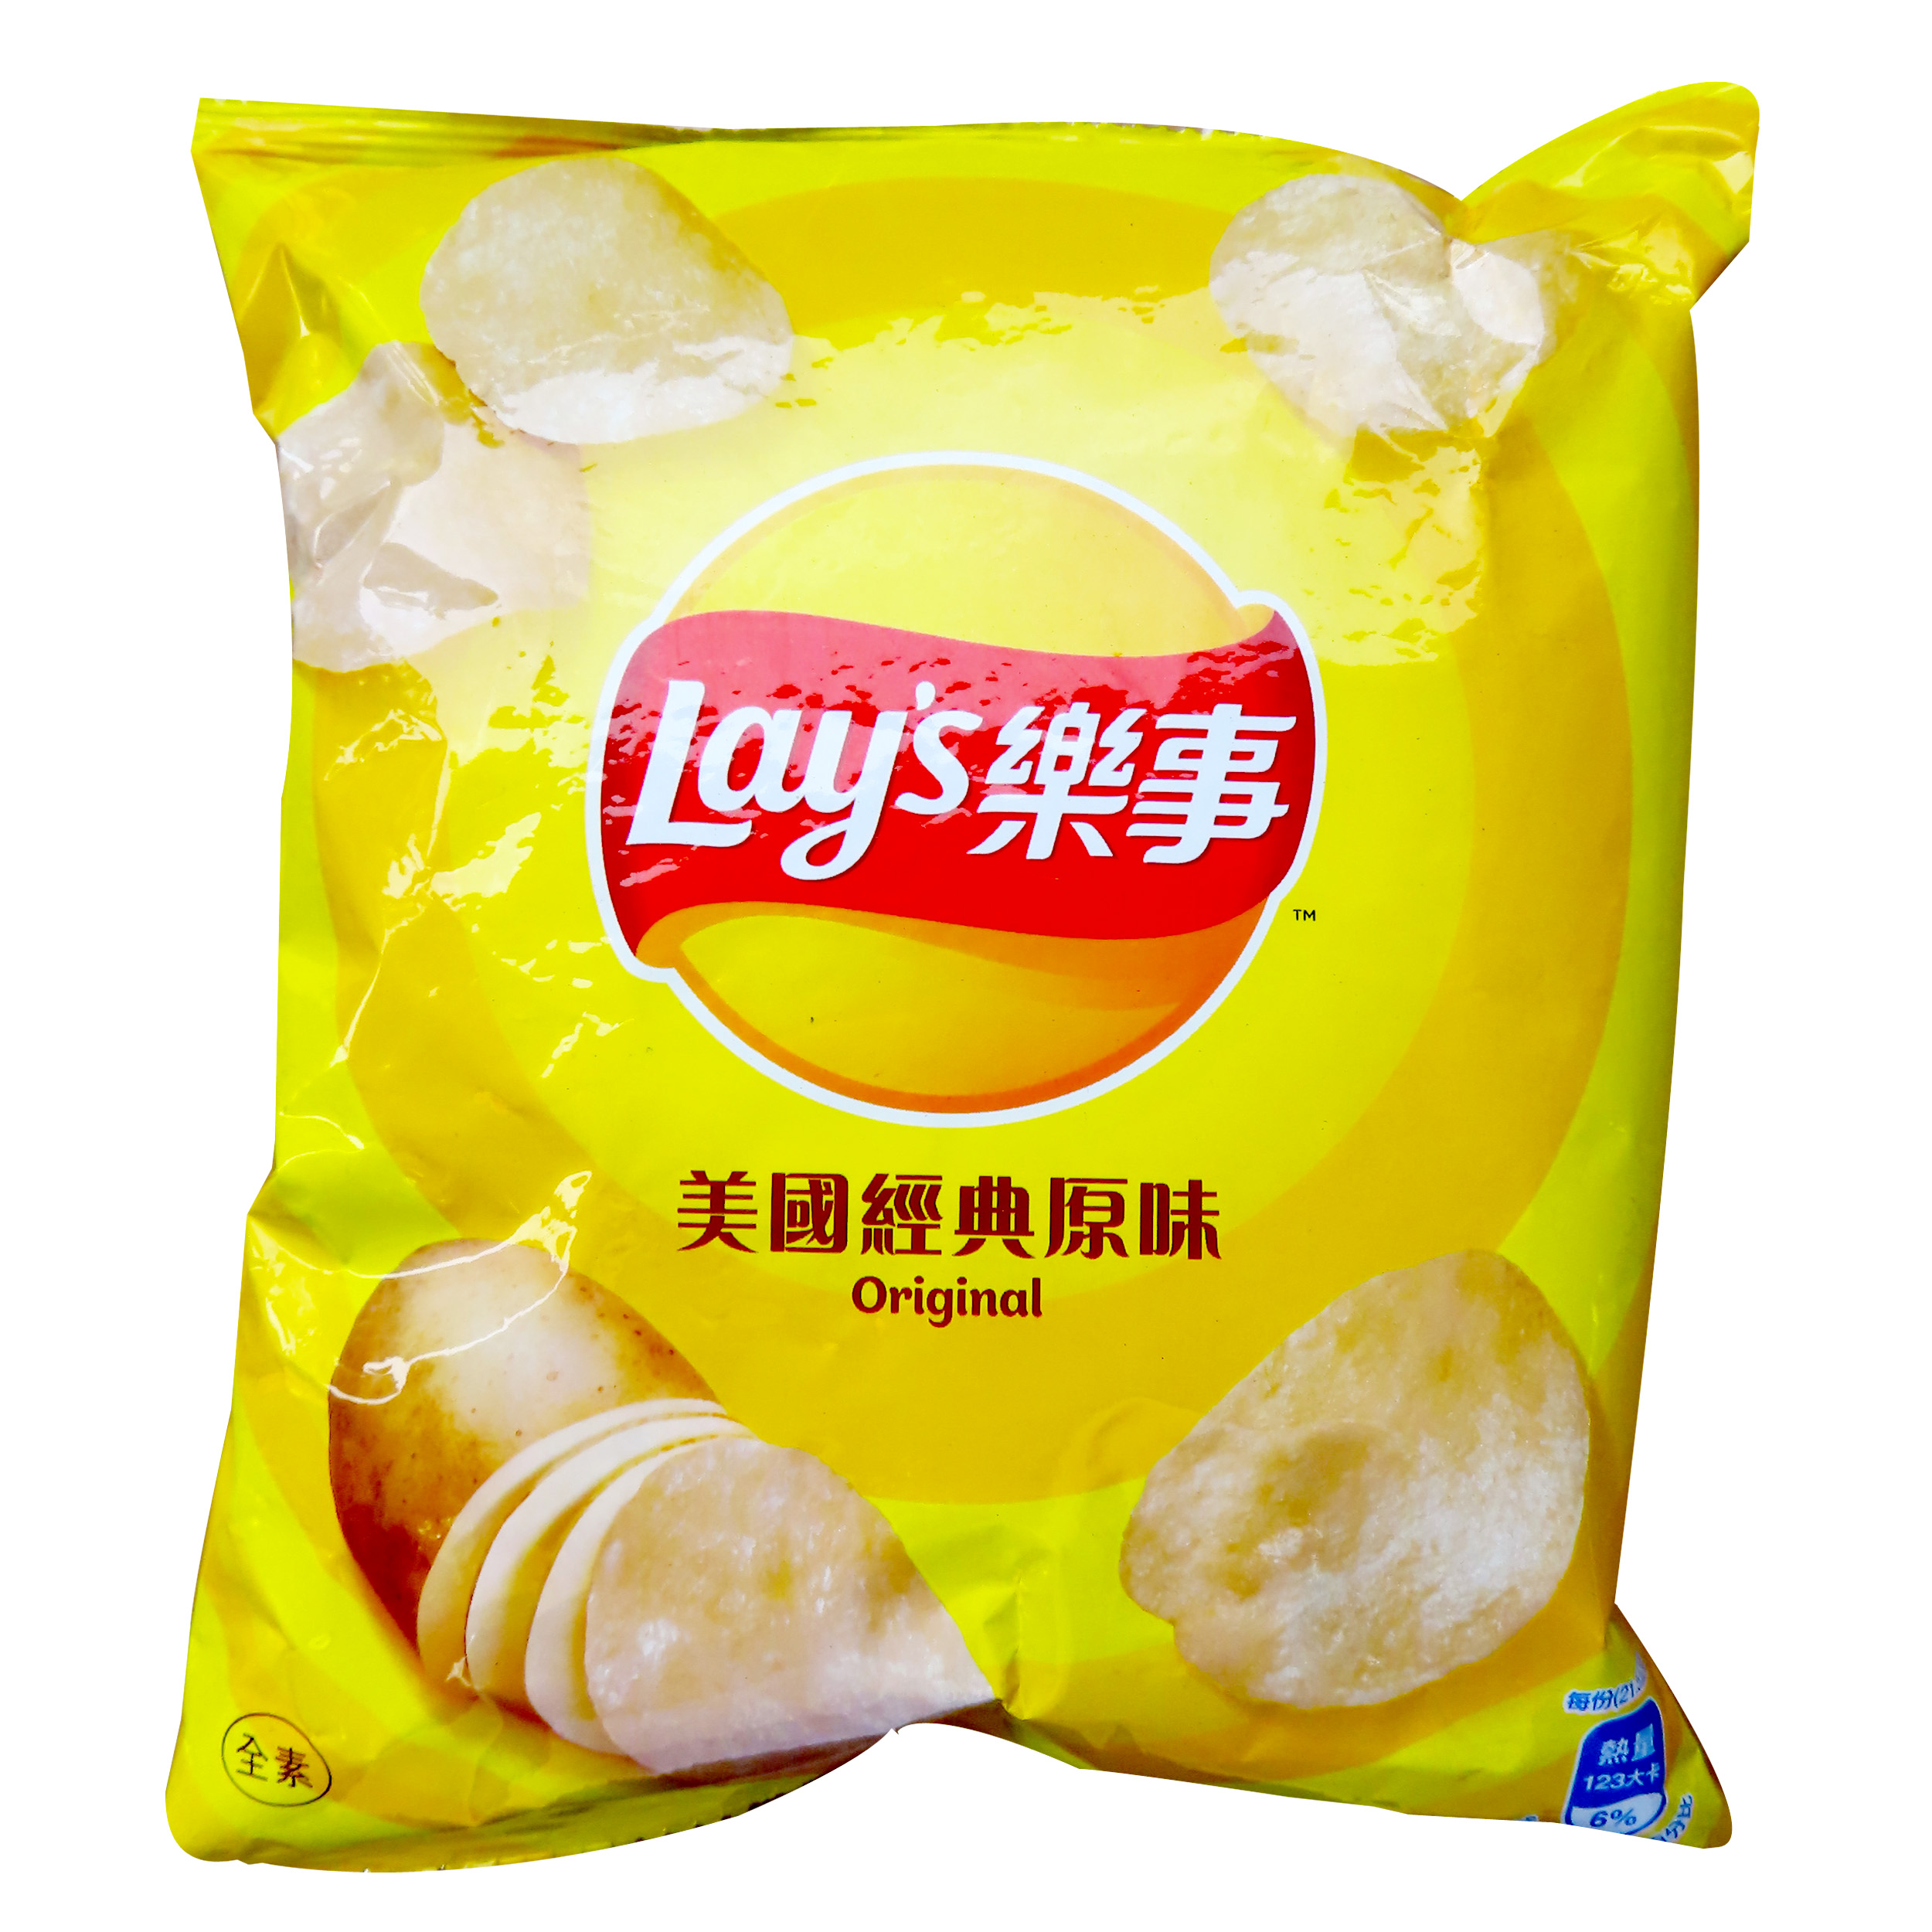 Image Lays Chips 乐事 - 洋芋片43grams